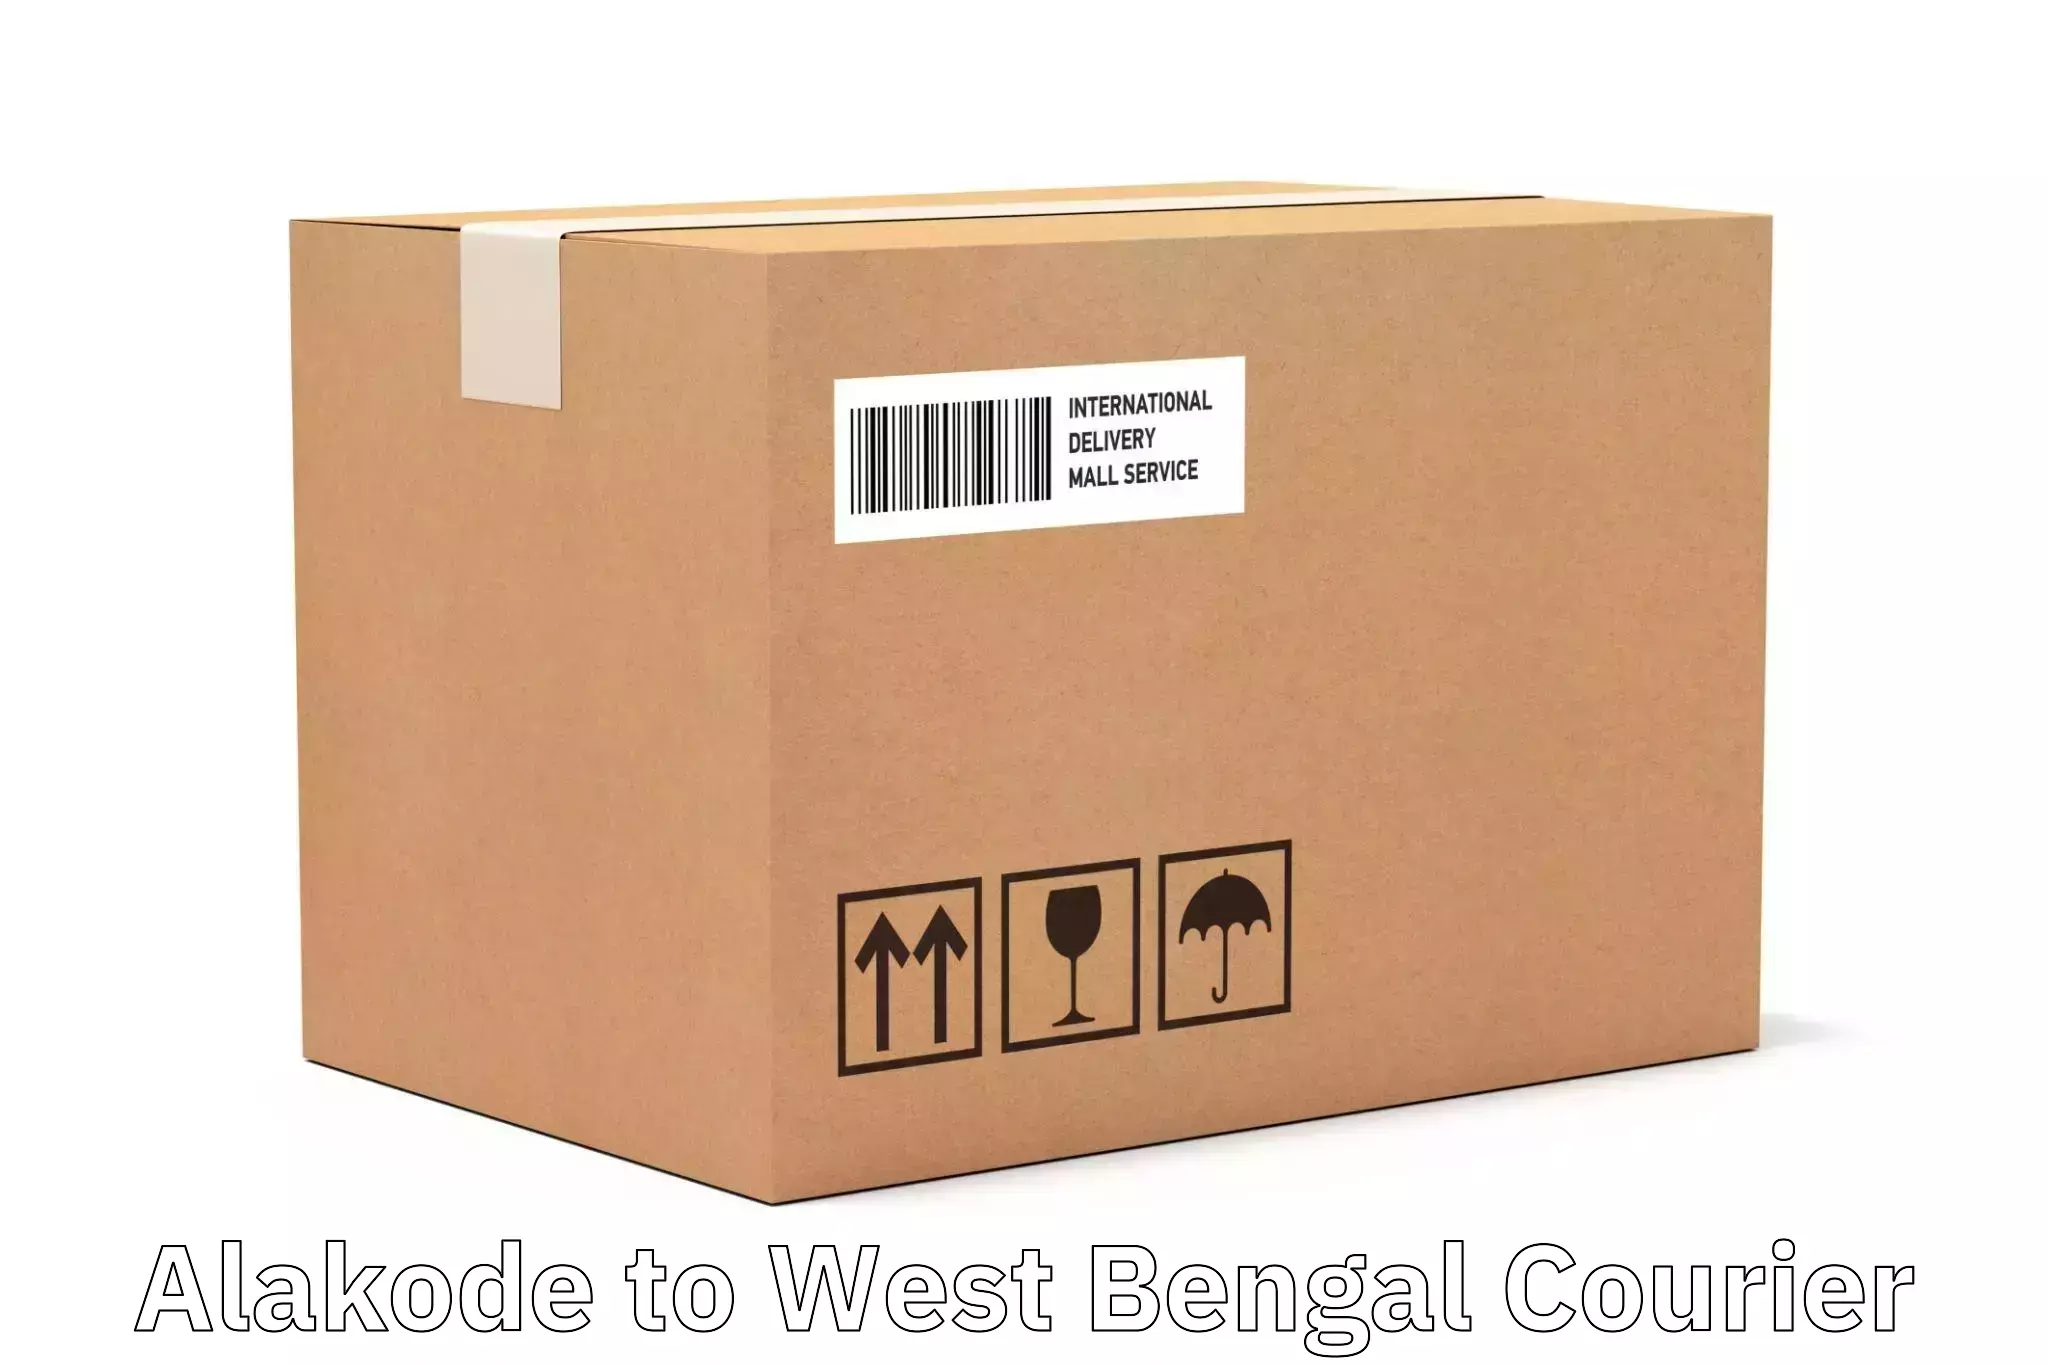 Advanced shipping technology Alakode to West Bengal